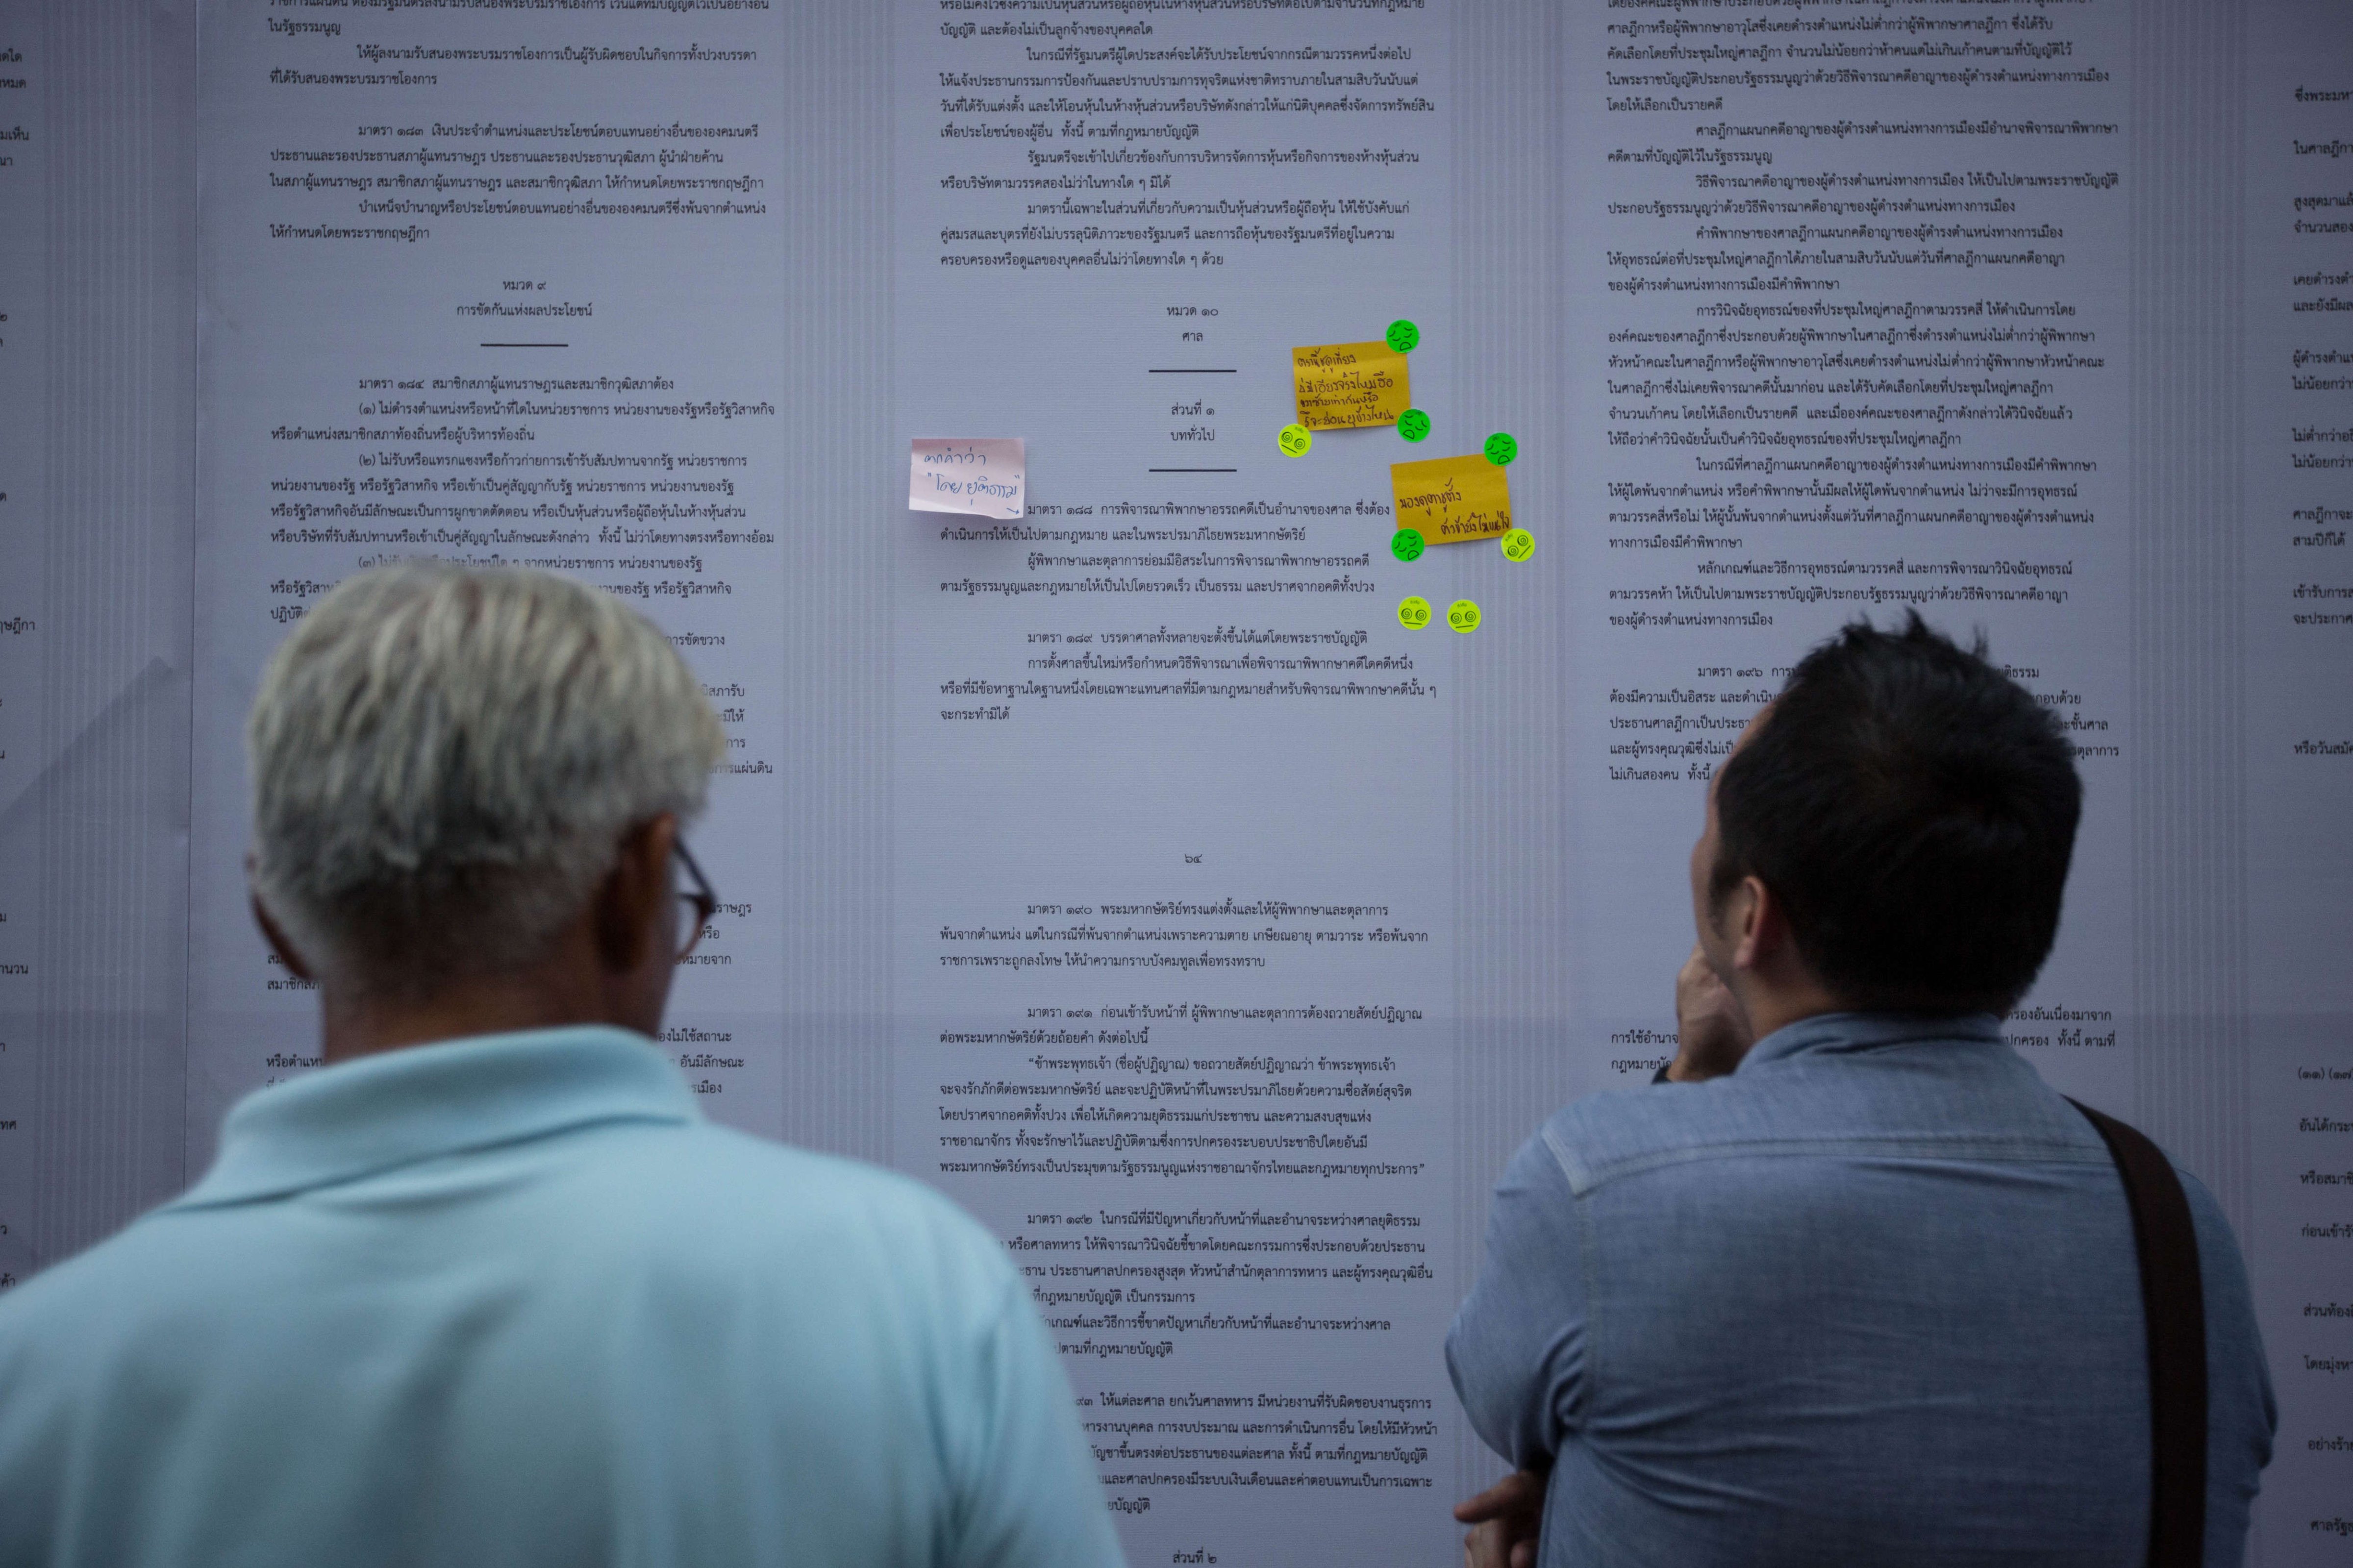 People read the new draft constitution displayed on the wall during the VOTE NO campaign at Thammasat University. (Guillaume Payen—LightRocket/Getty Images)